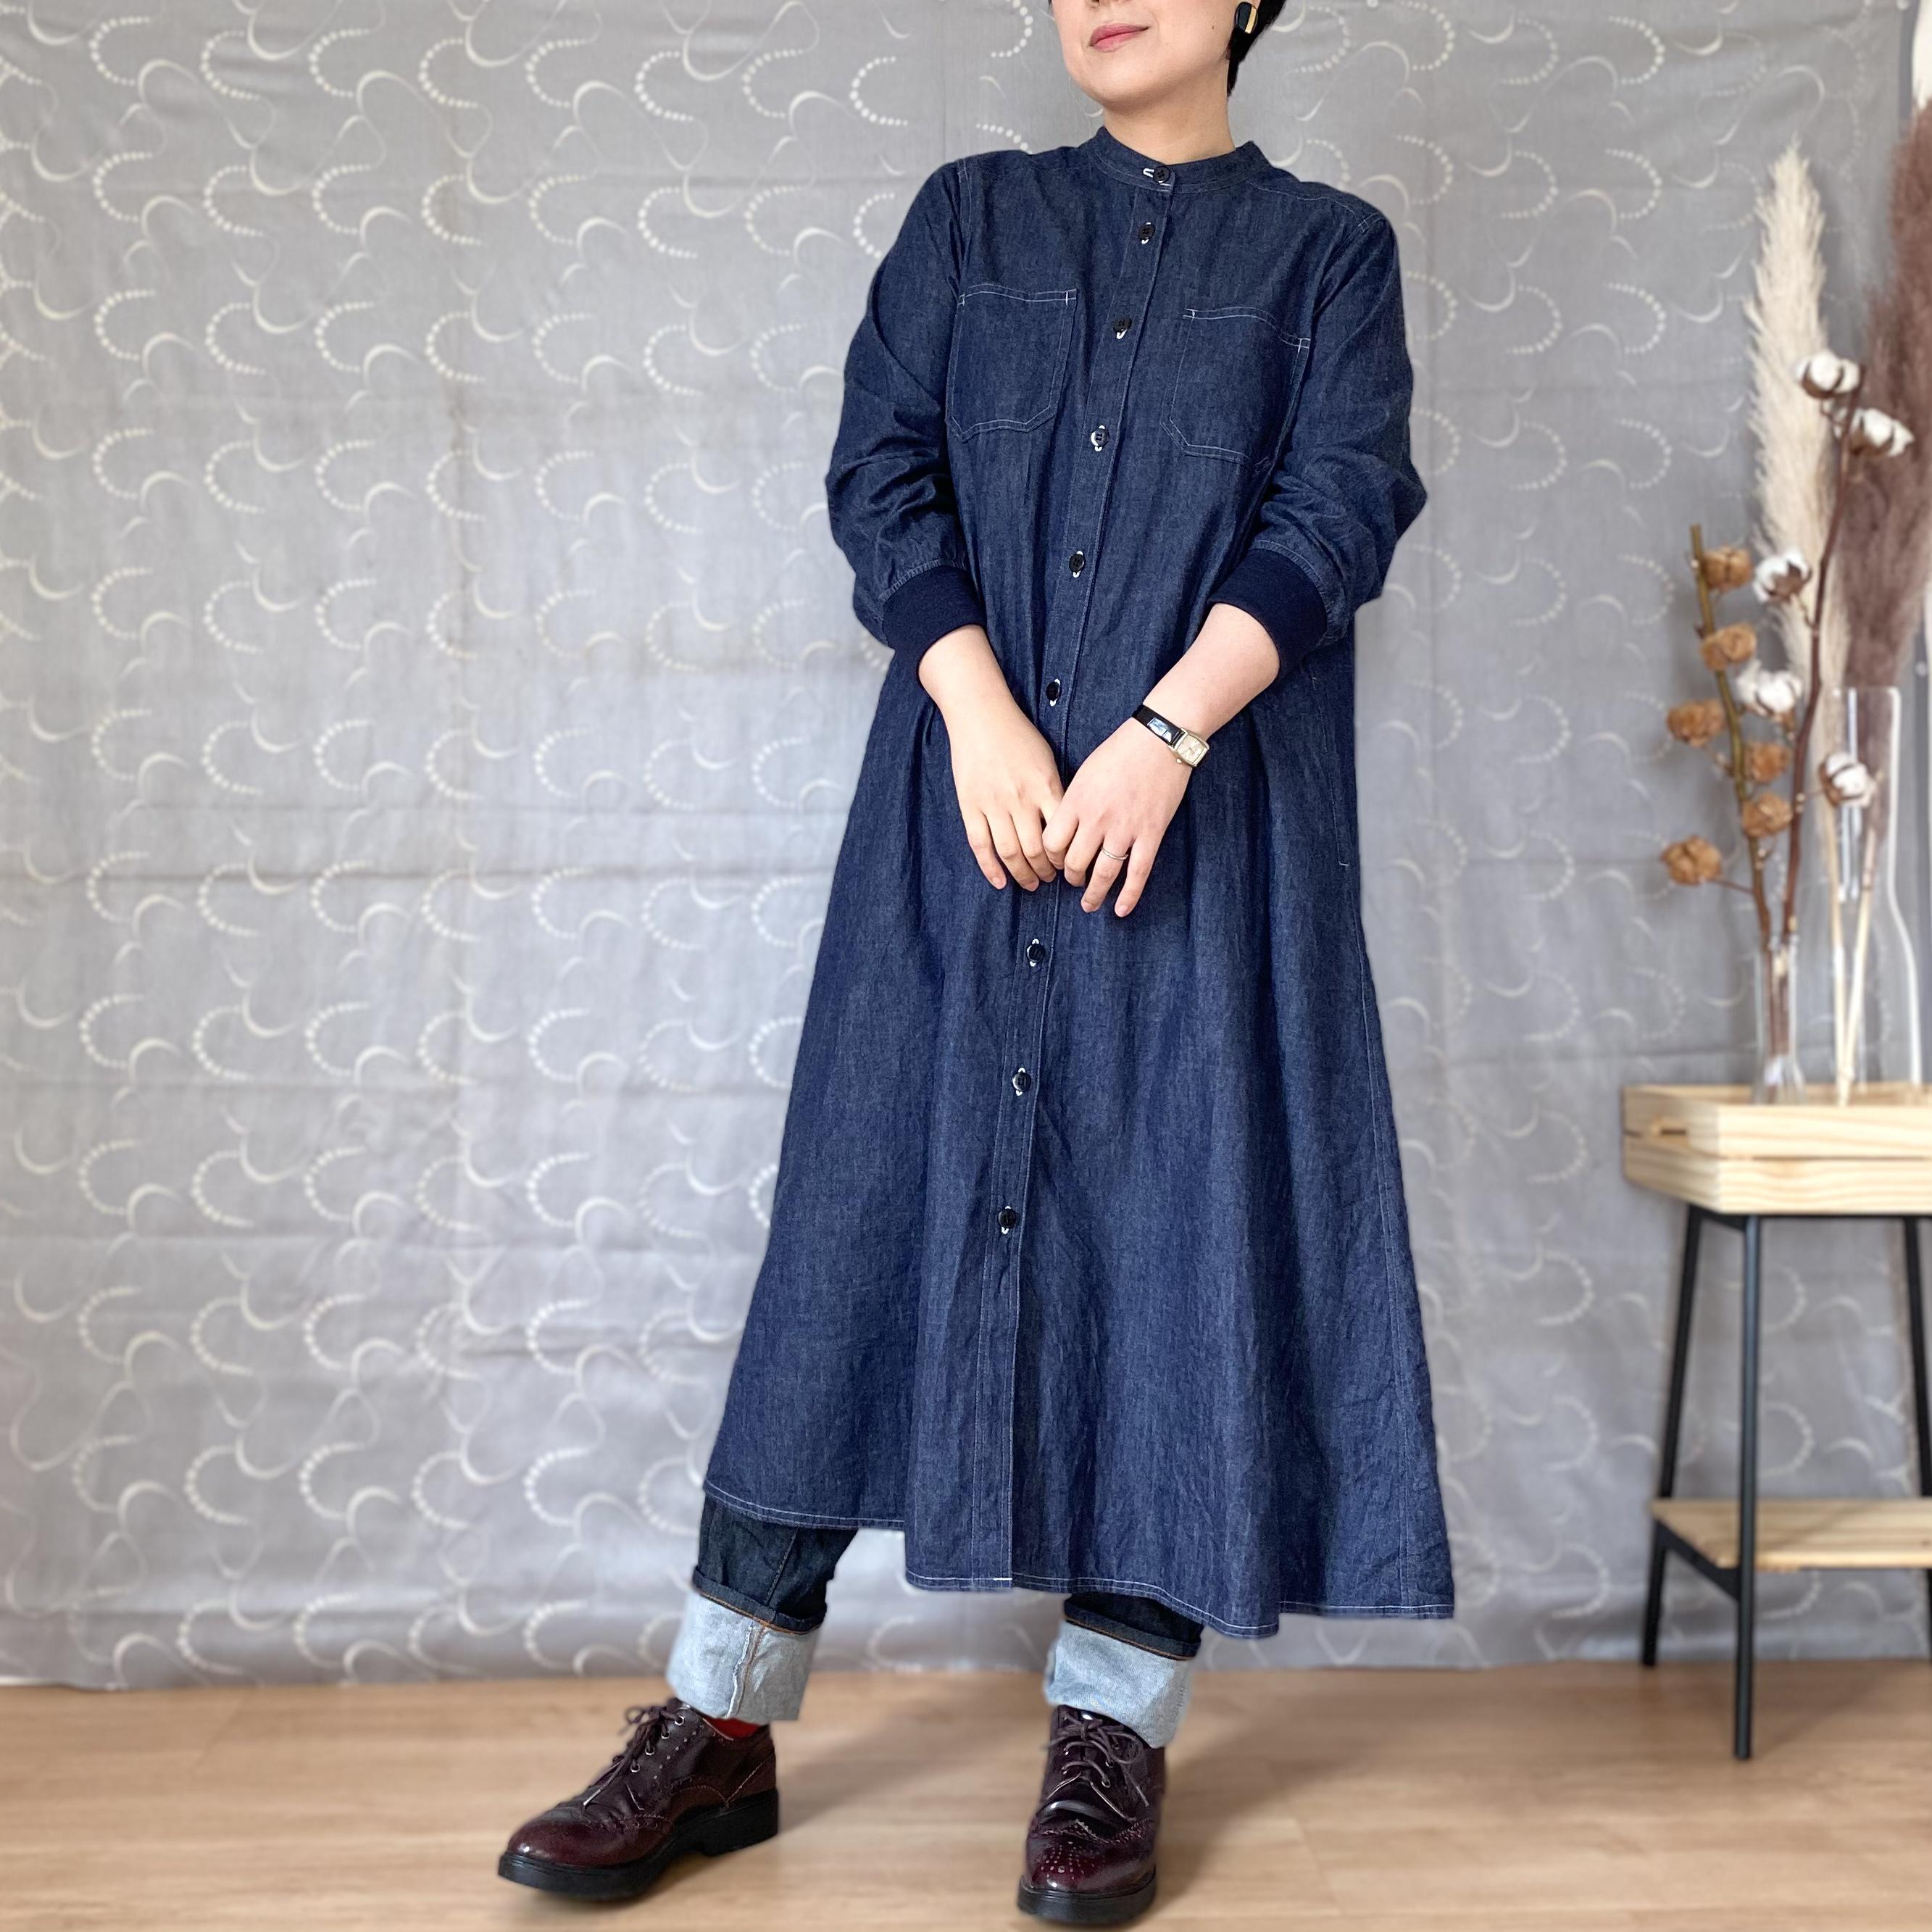 ❤️New❤️50 vintage ヴィンテージ レトロ 柄 シャツワンピース